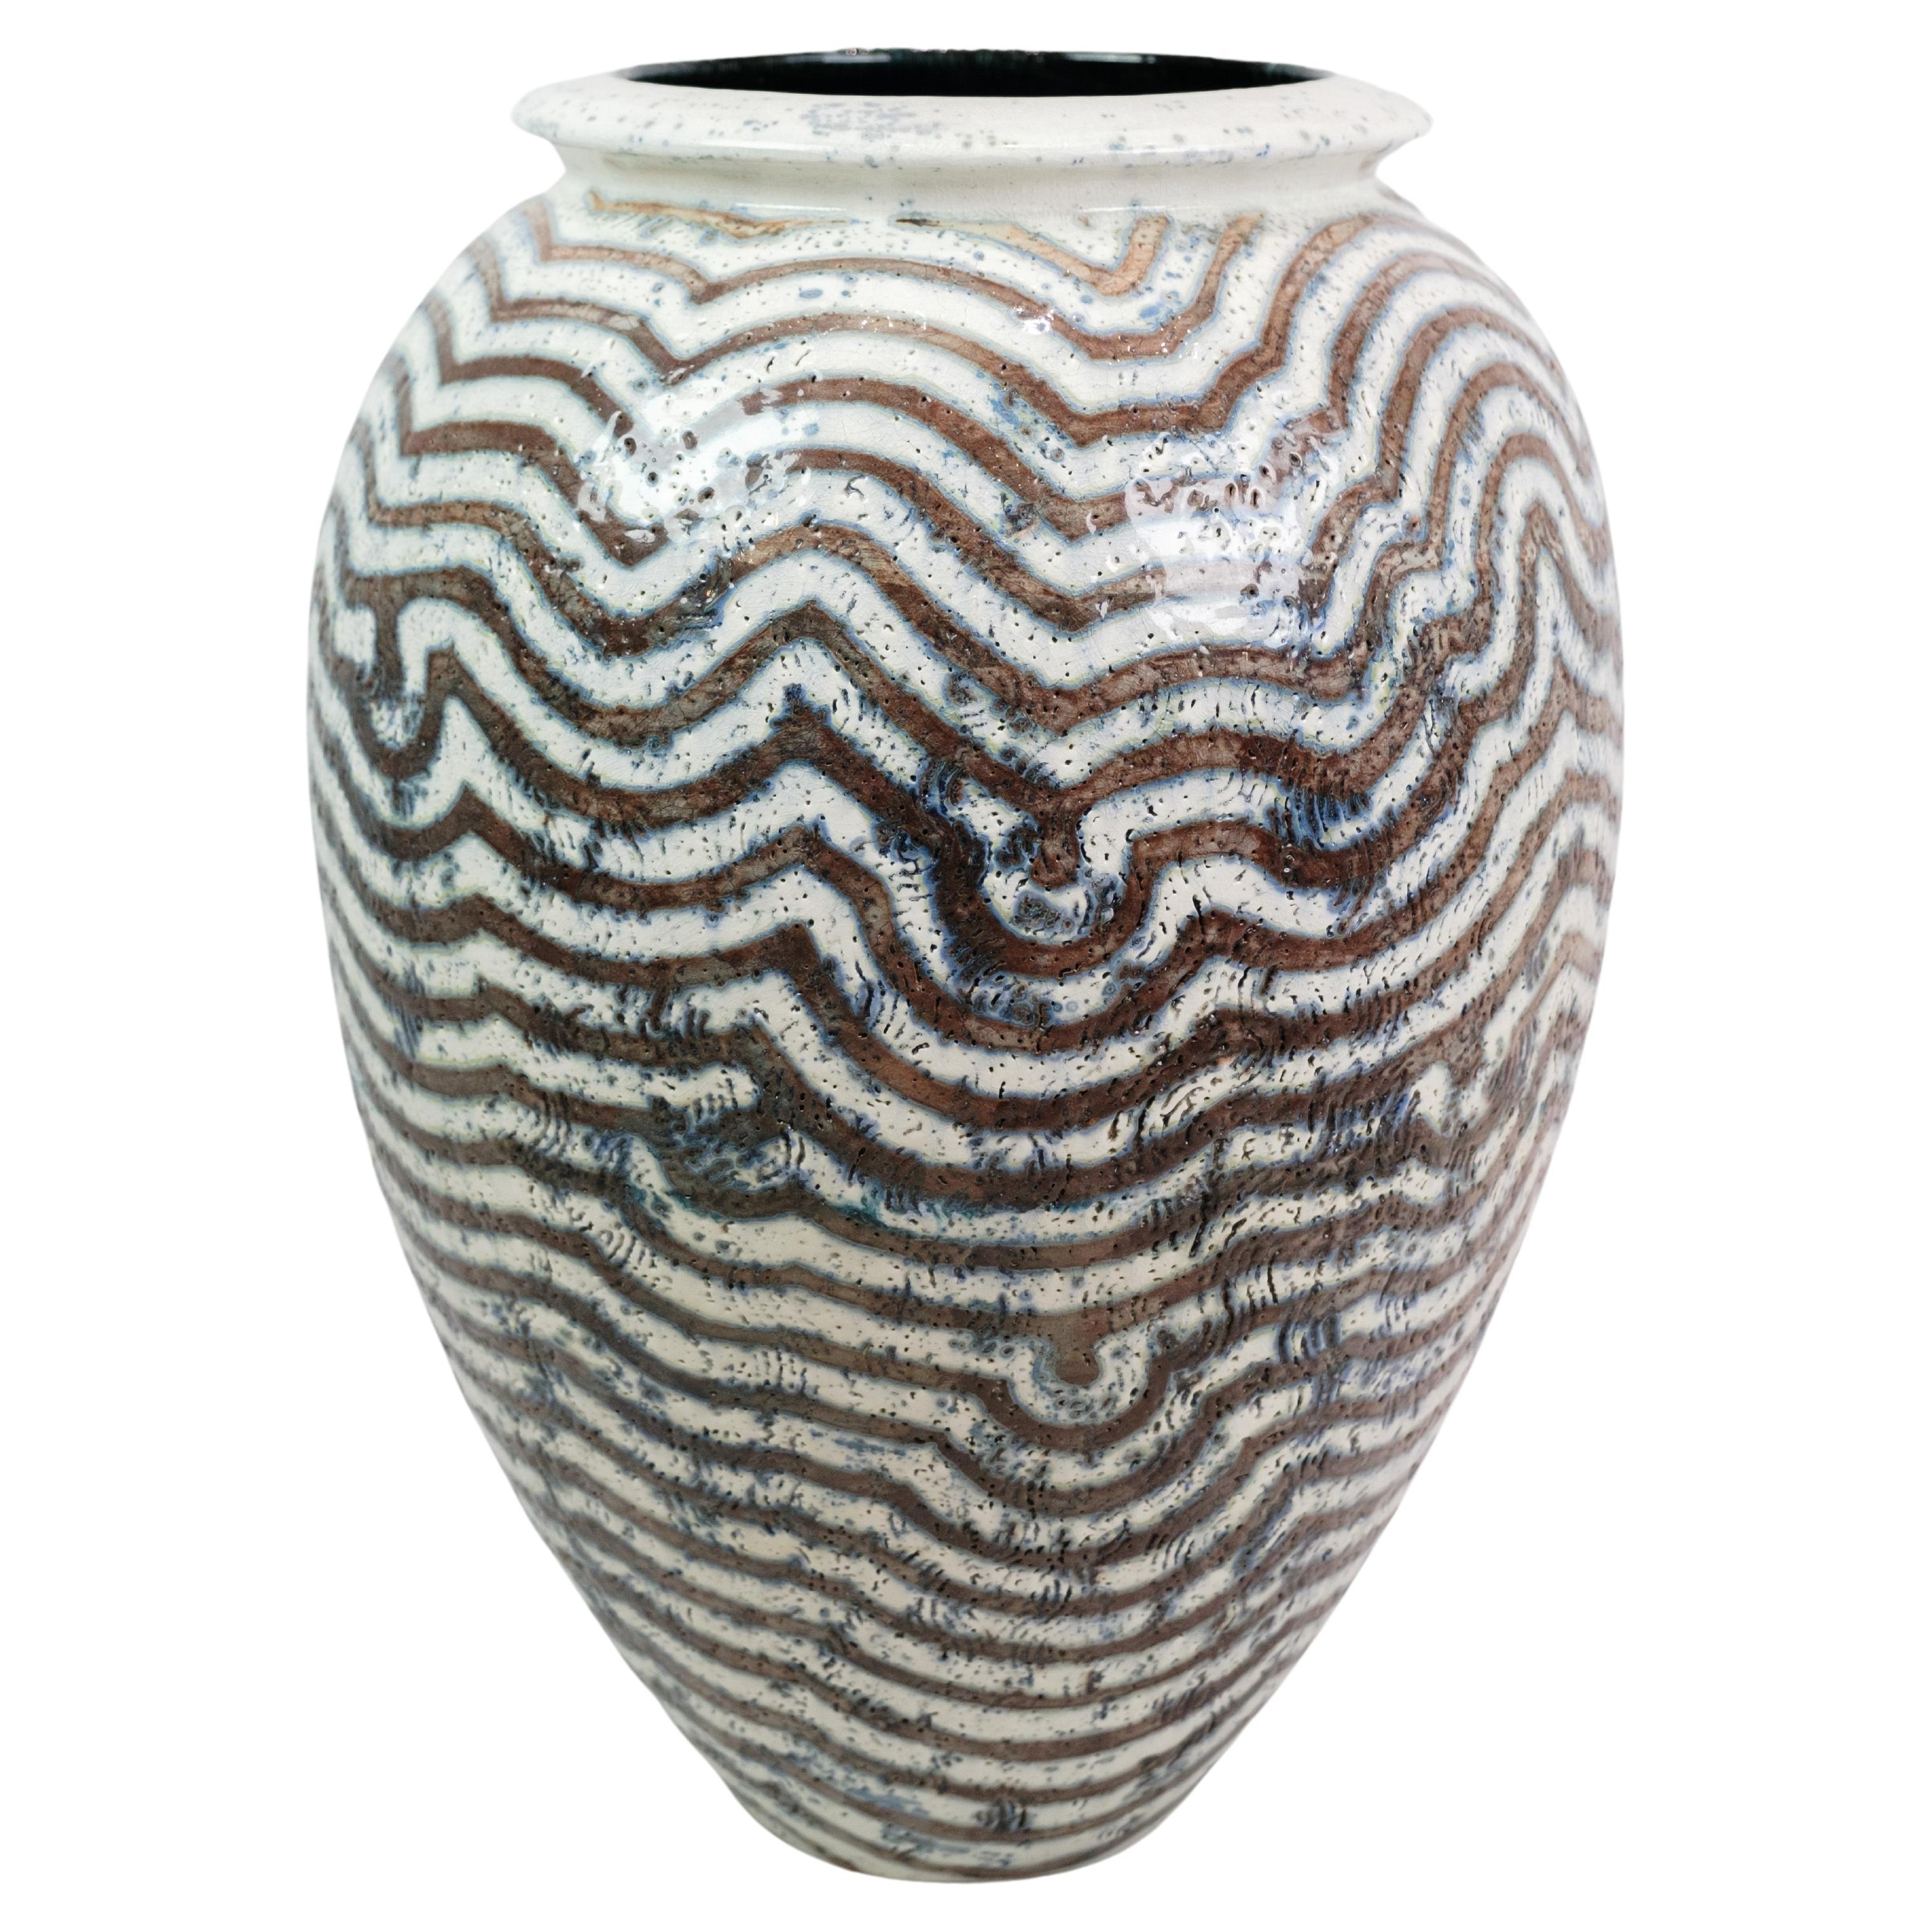 Stoneware Floor Vase In Blue, Grey and White Designed By Per Weiss From 1980s